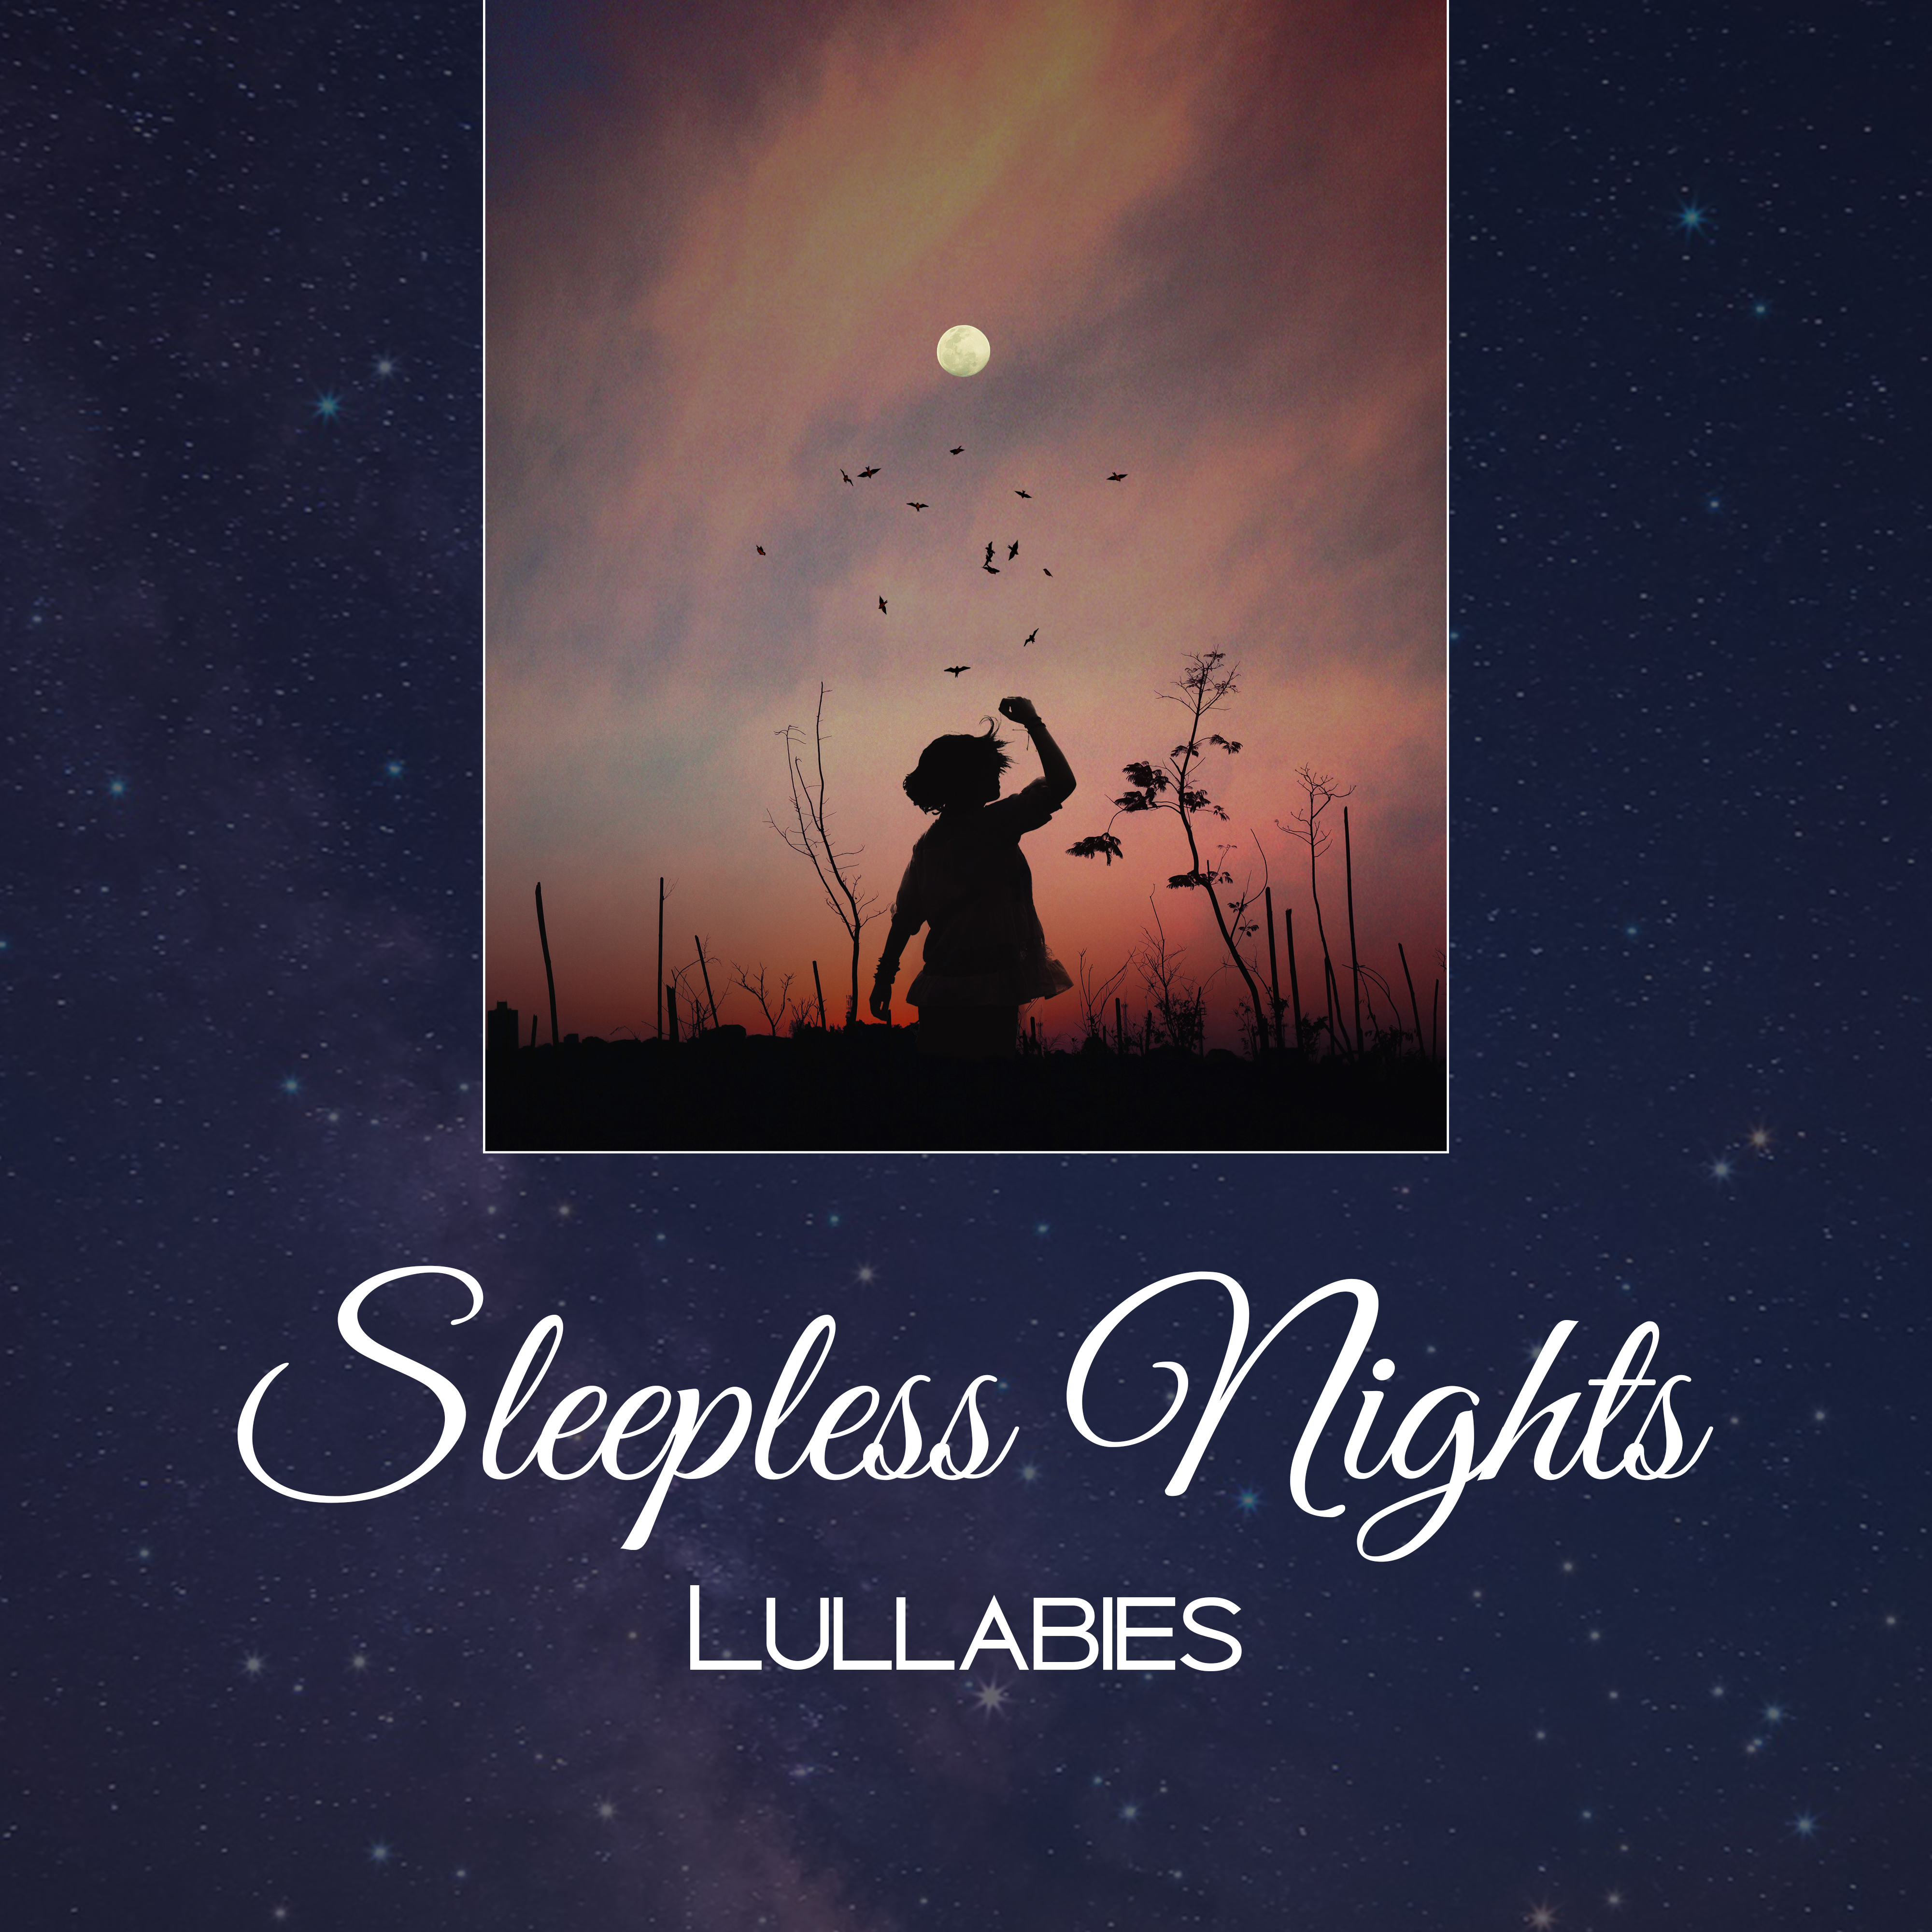 Sleepless Nights Lullabies  New Age 2017, Music for Sleep, Deep Relaxation, Calm of Mind, Rest